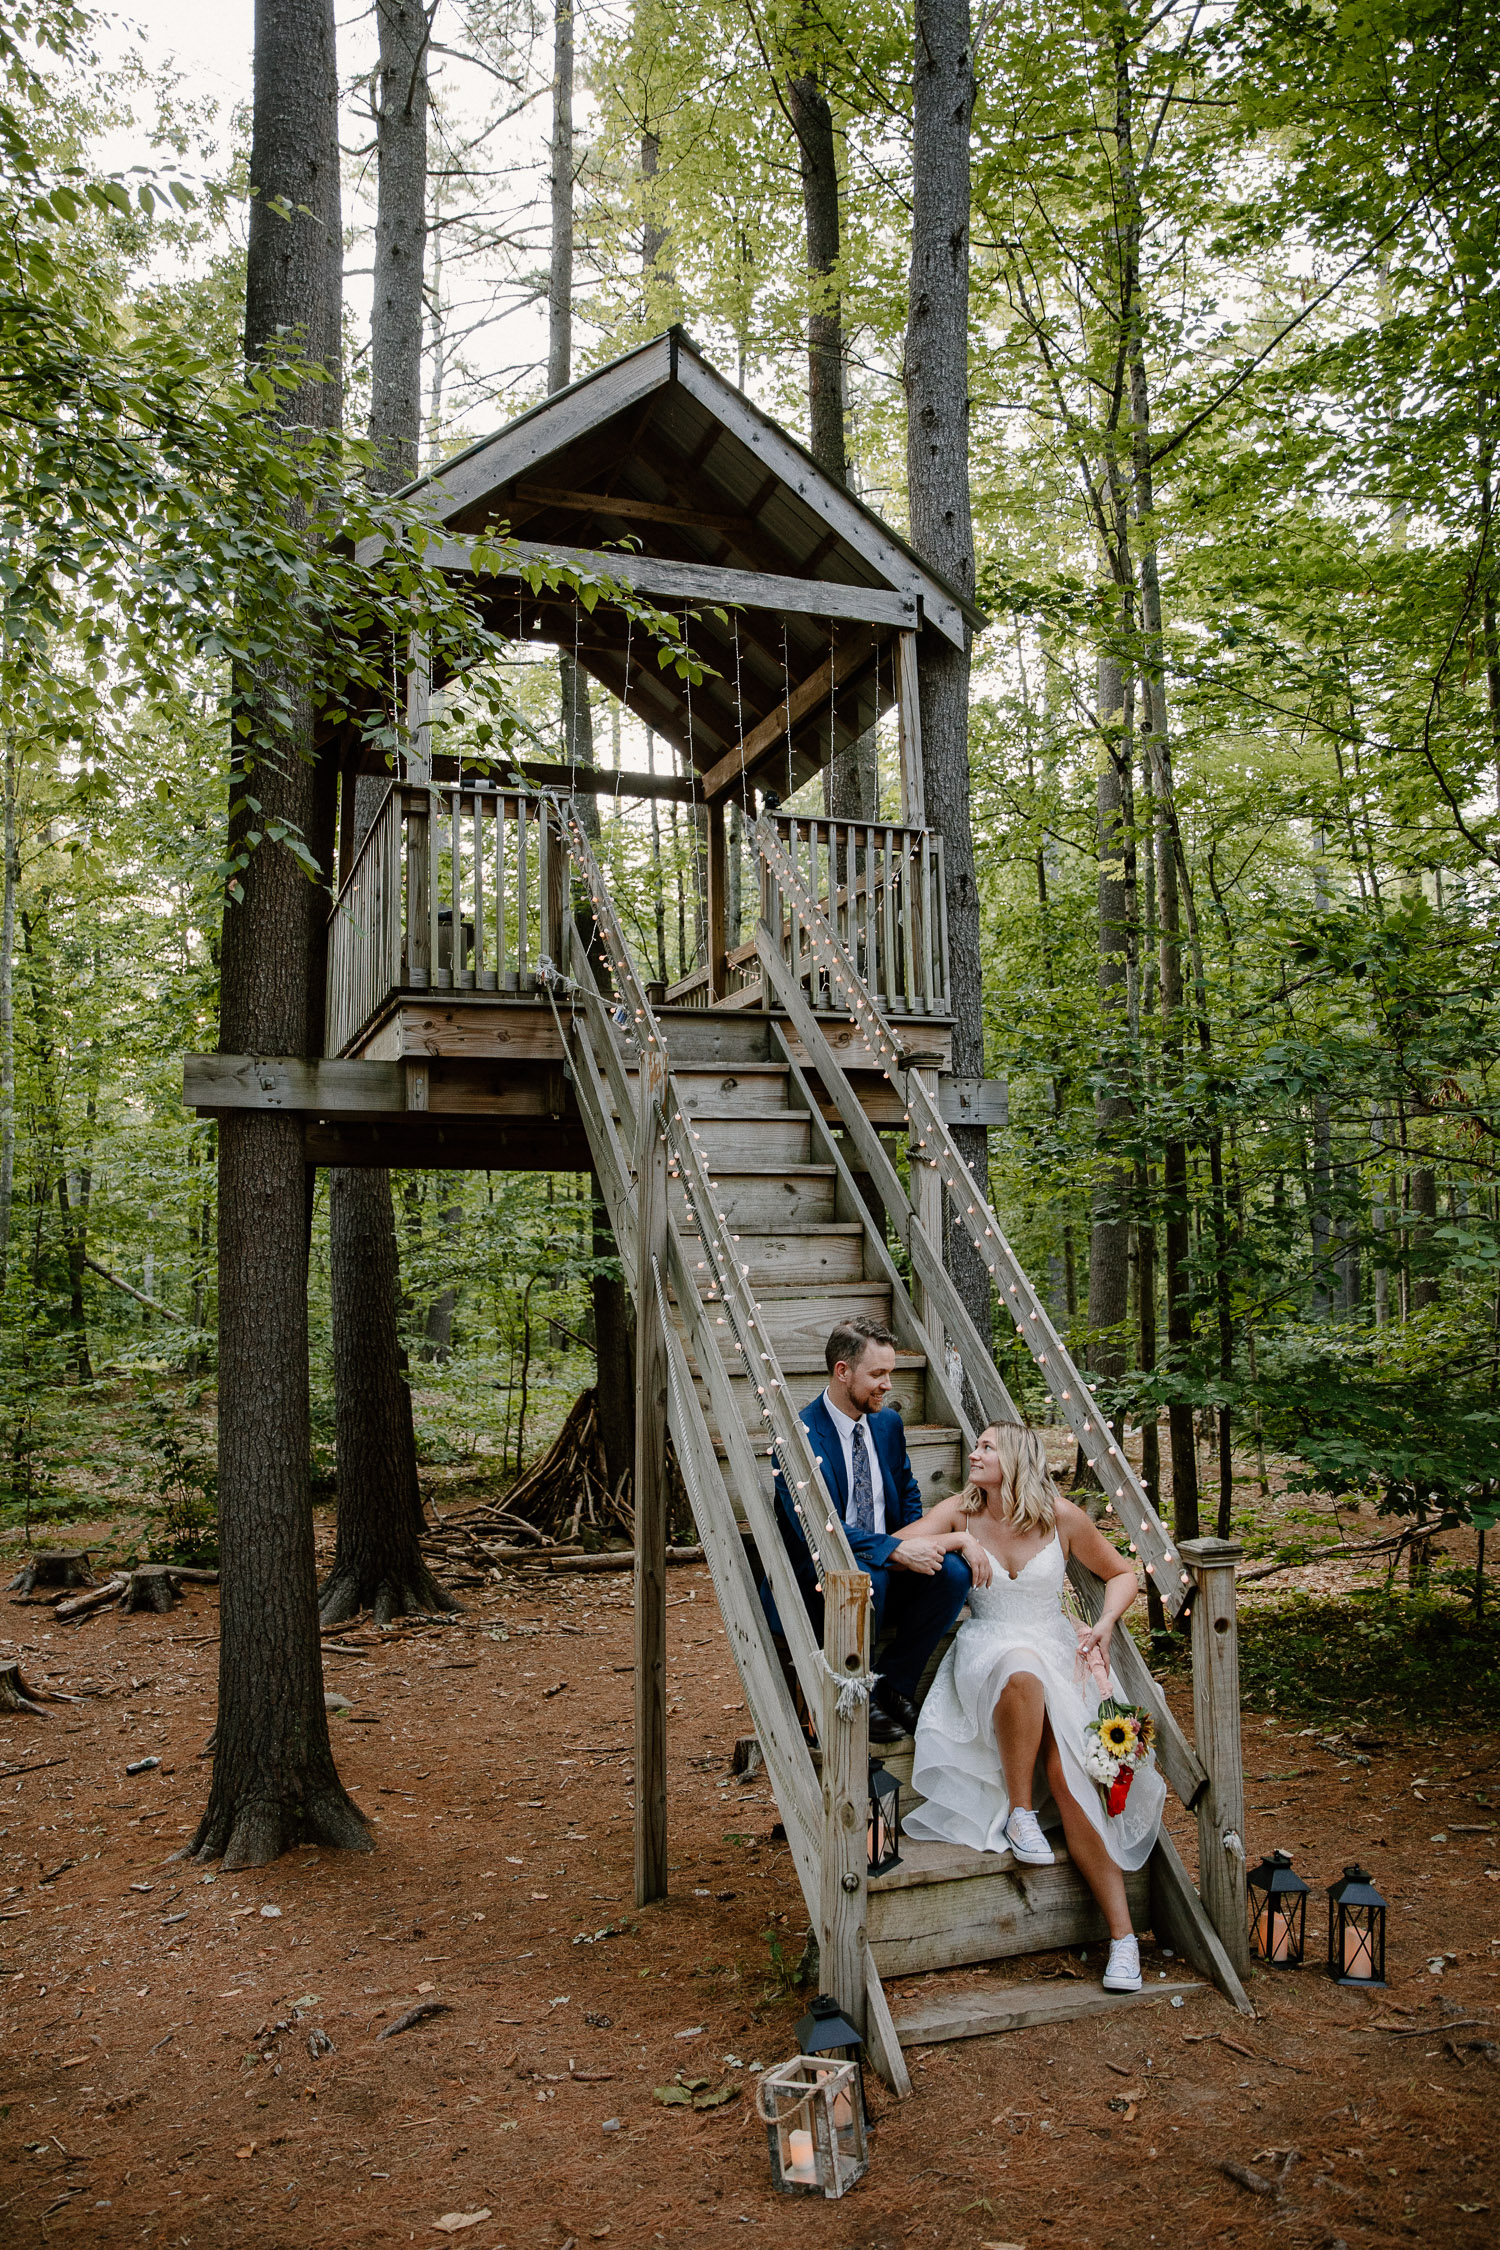 New Hampshire wedding venue in the woods